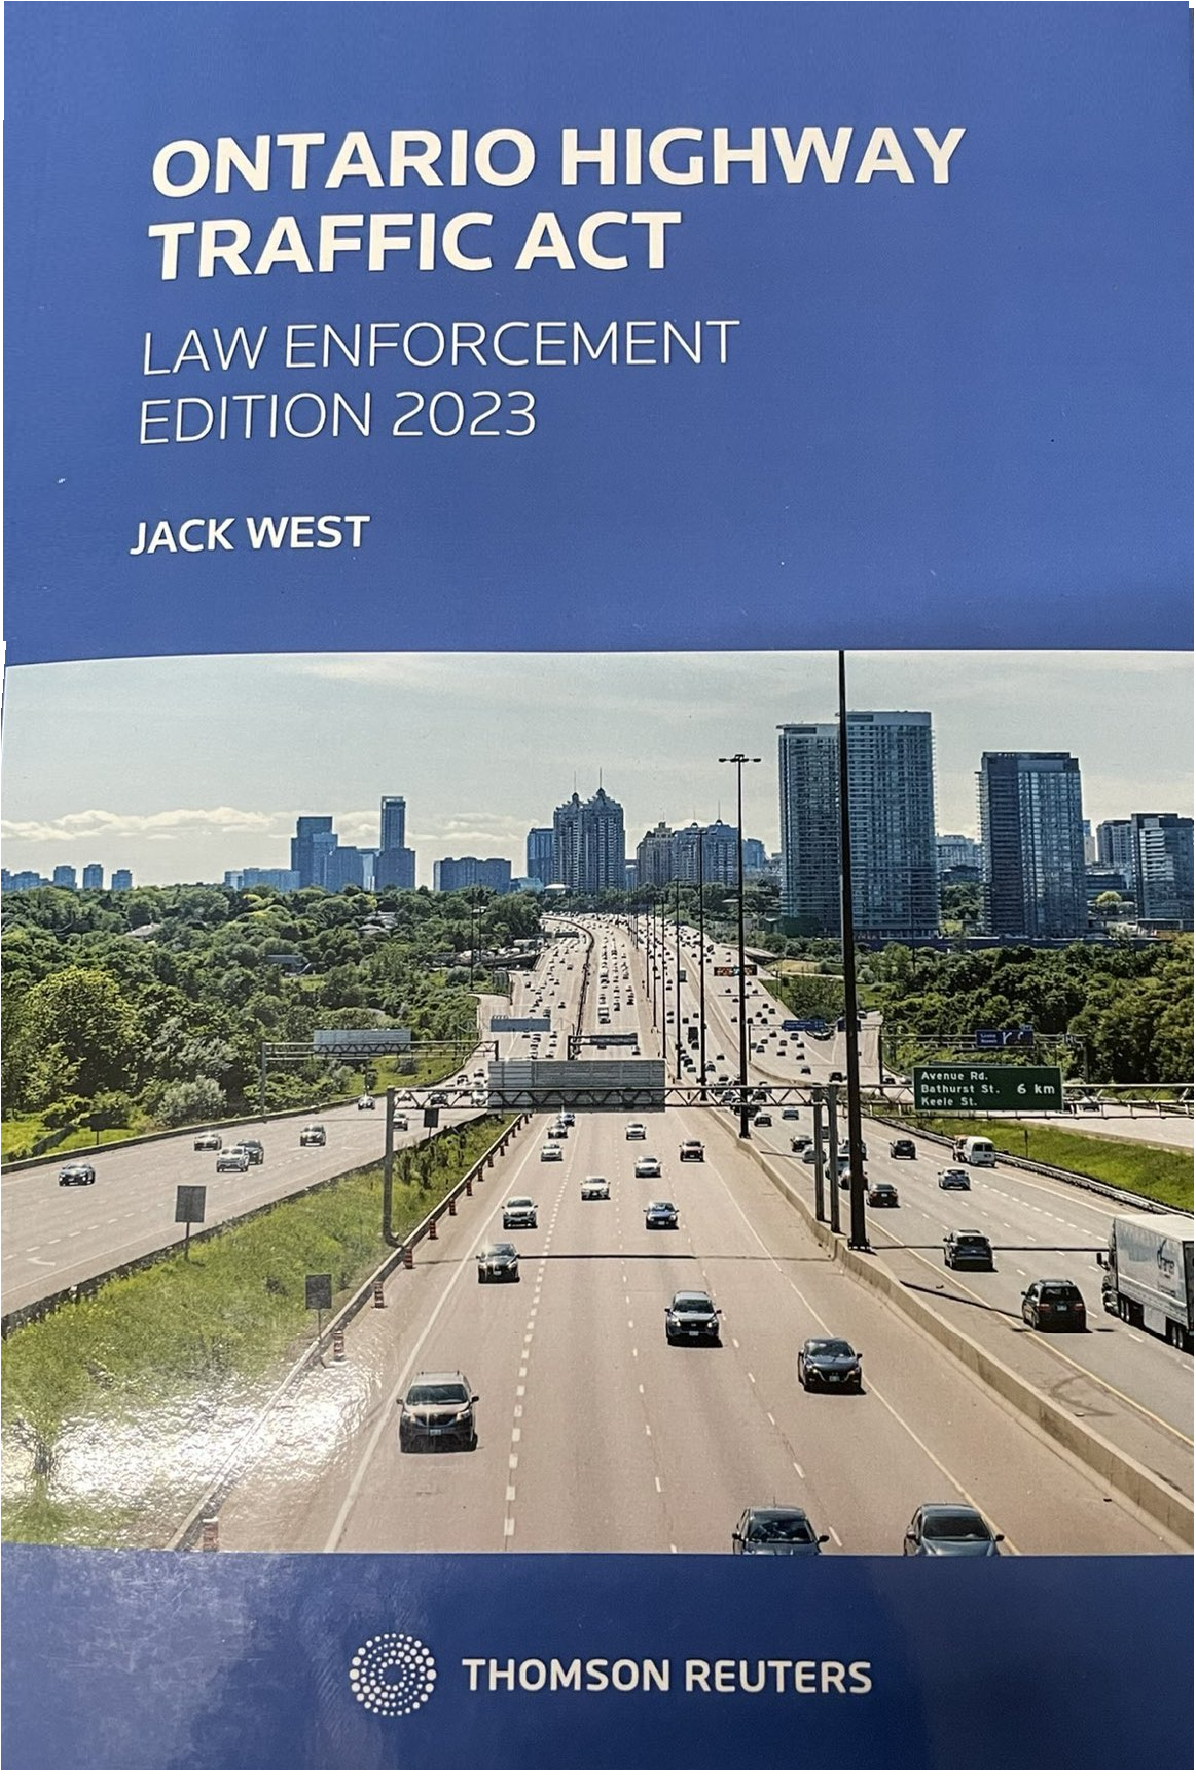 Ontario Highway Traffic Act: Law Enforcement Edition 2023